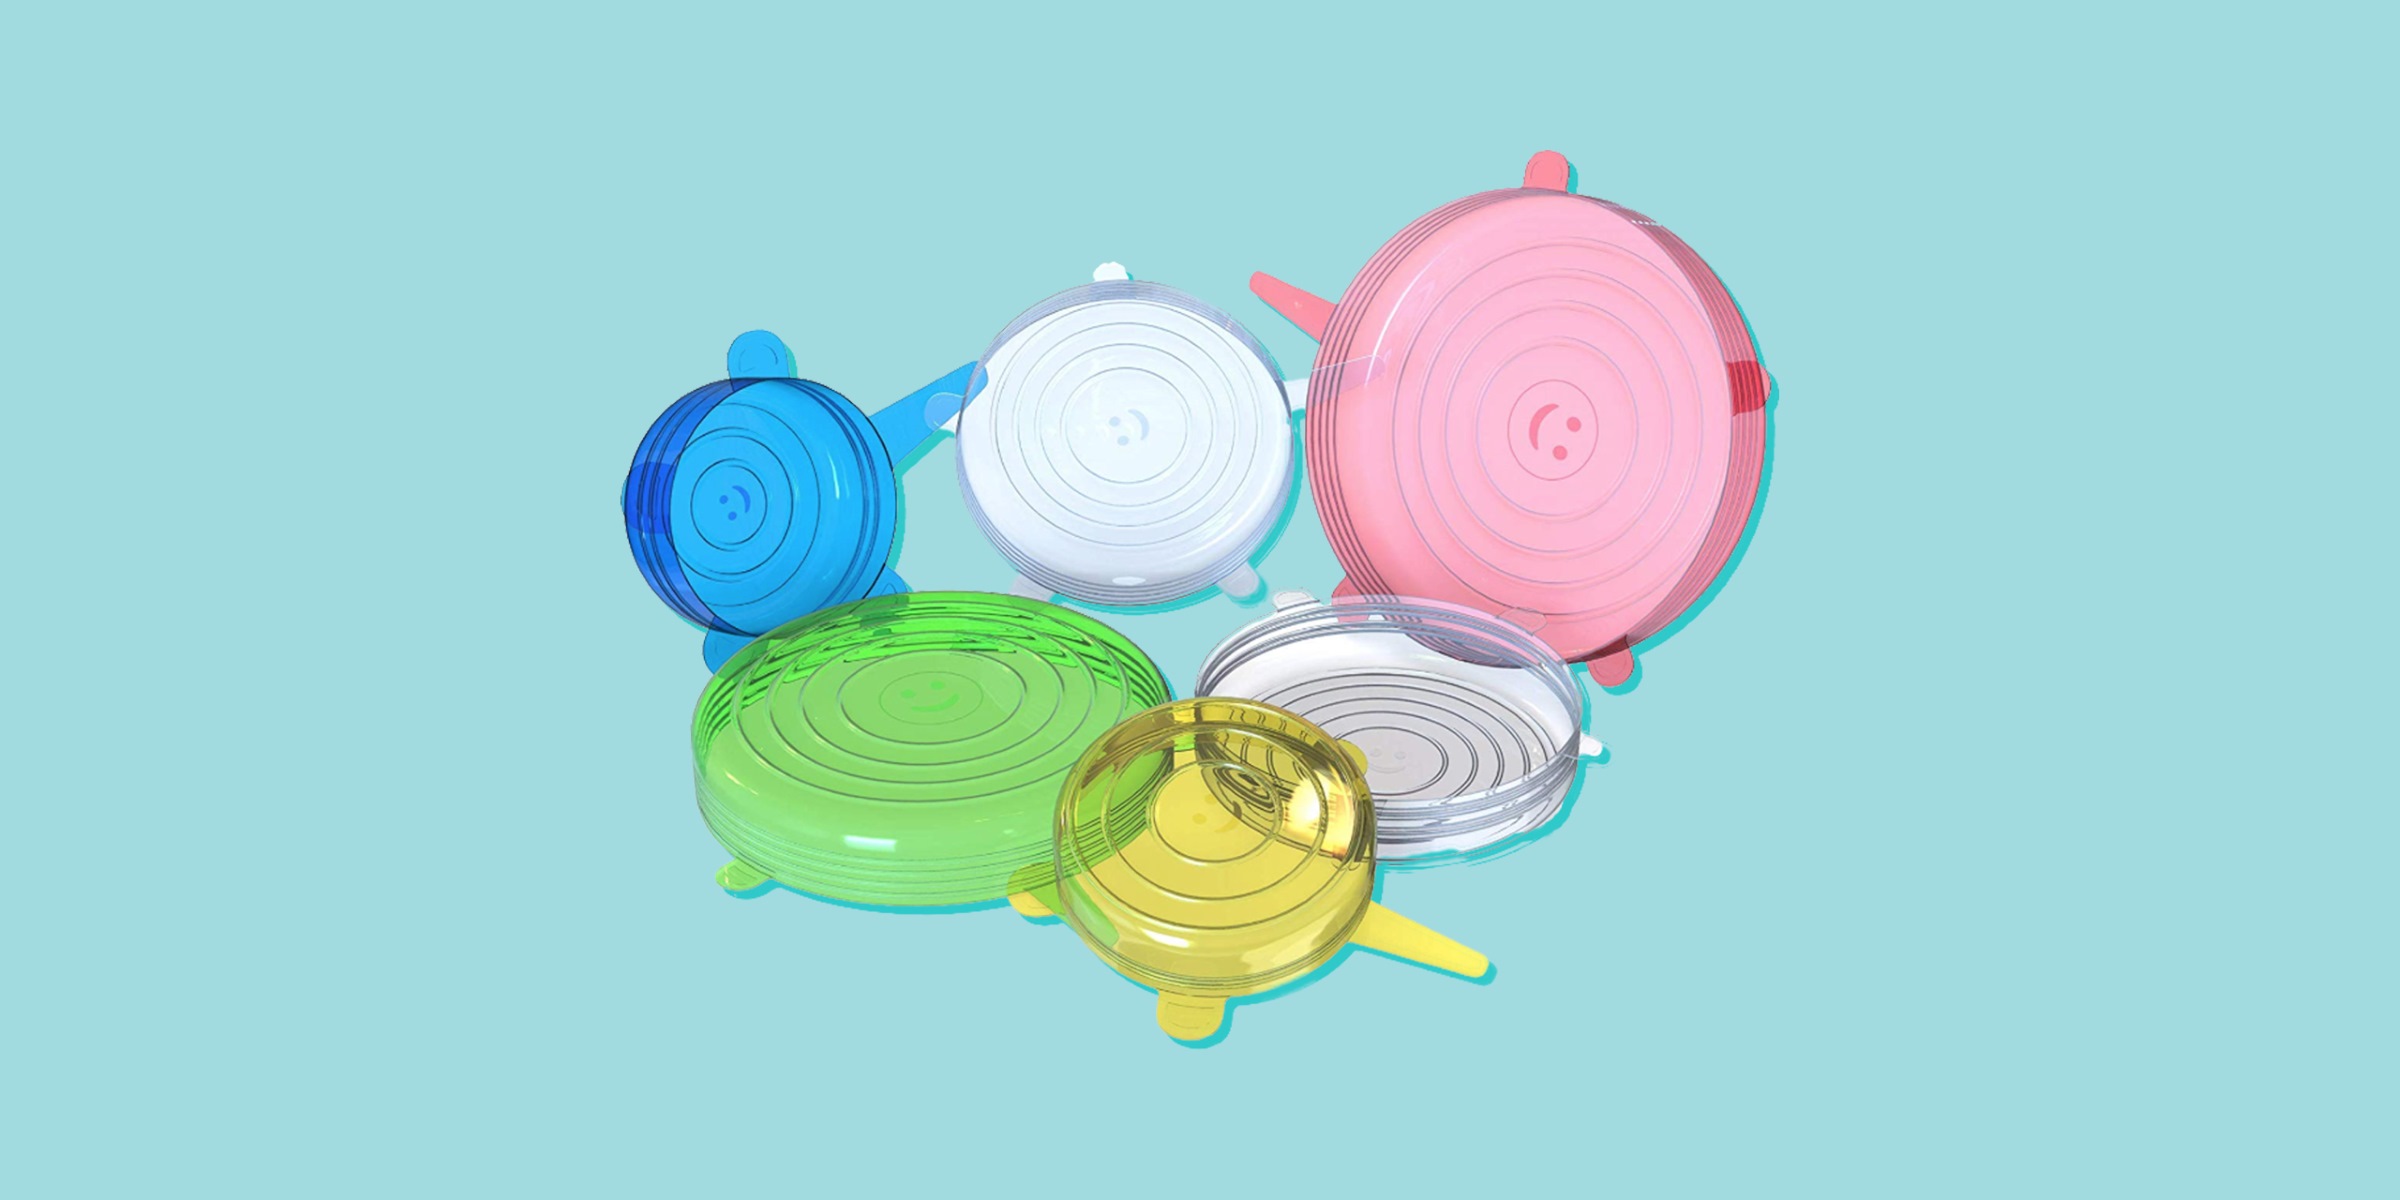 10 Best Silicone Bowl Covers for 2023